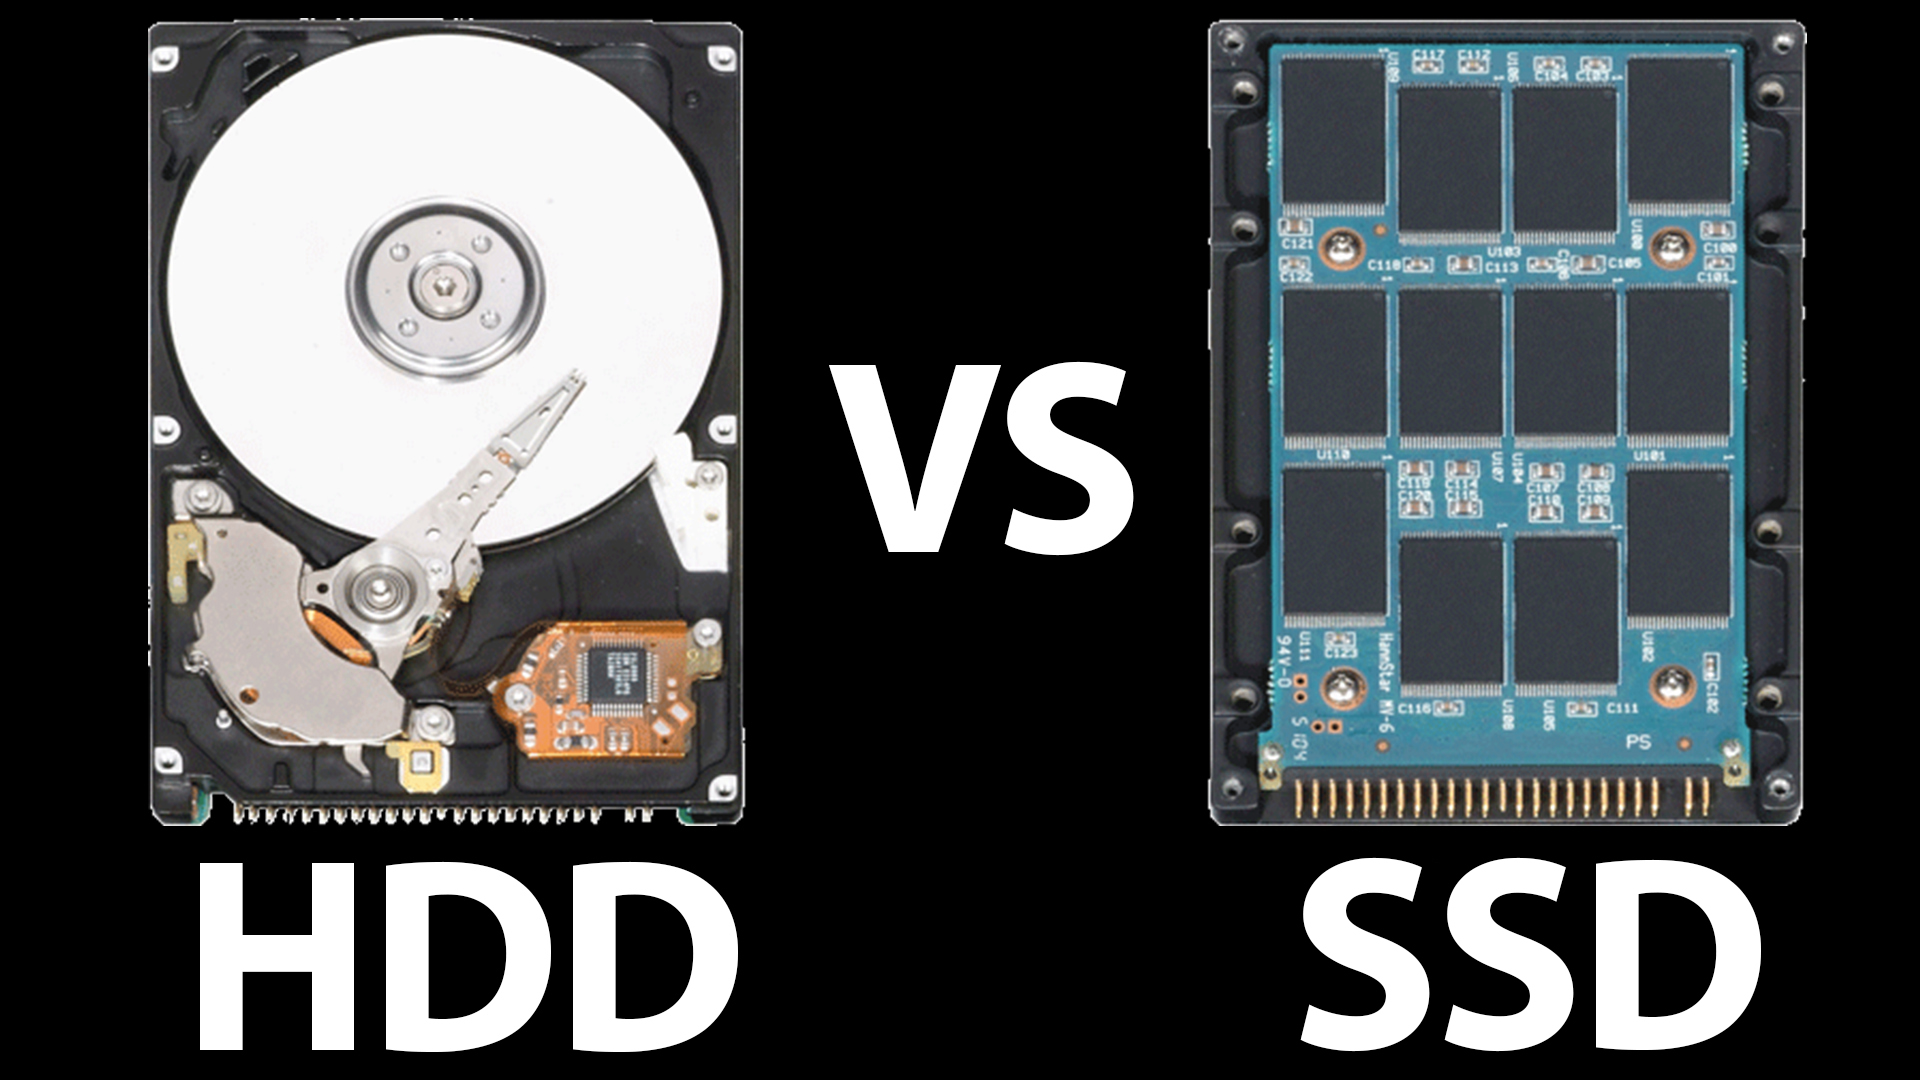 Solid State Drive (SSD) vs Hard Disk Drive (HDD)